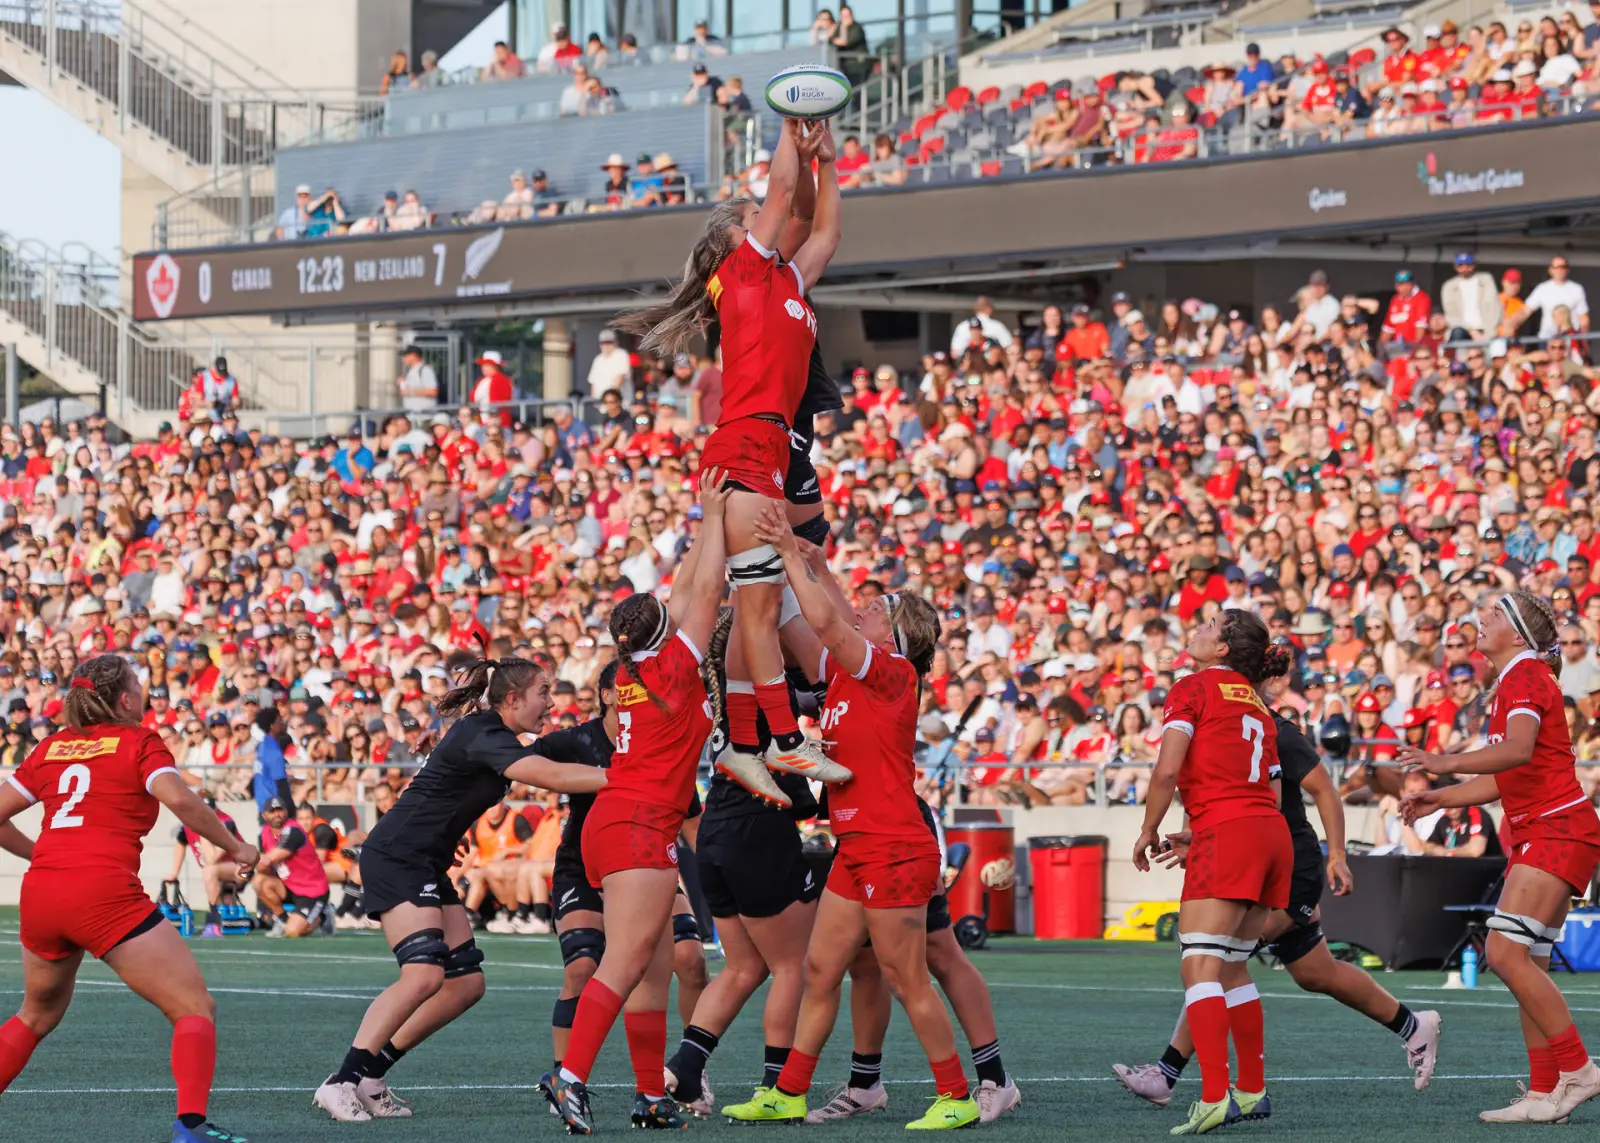 Major Sporting and Association Events Merge in Ottawa